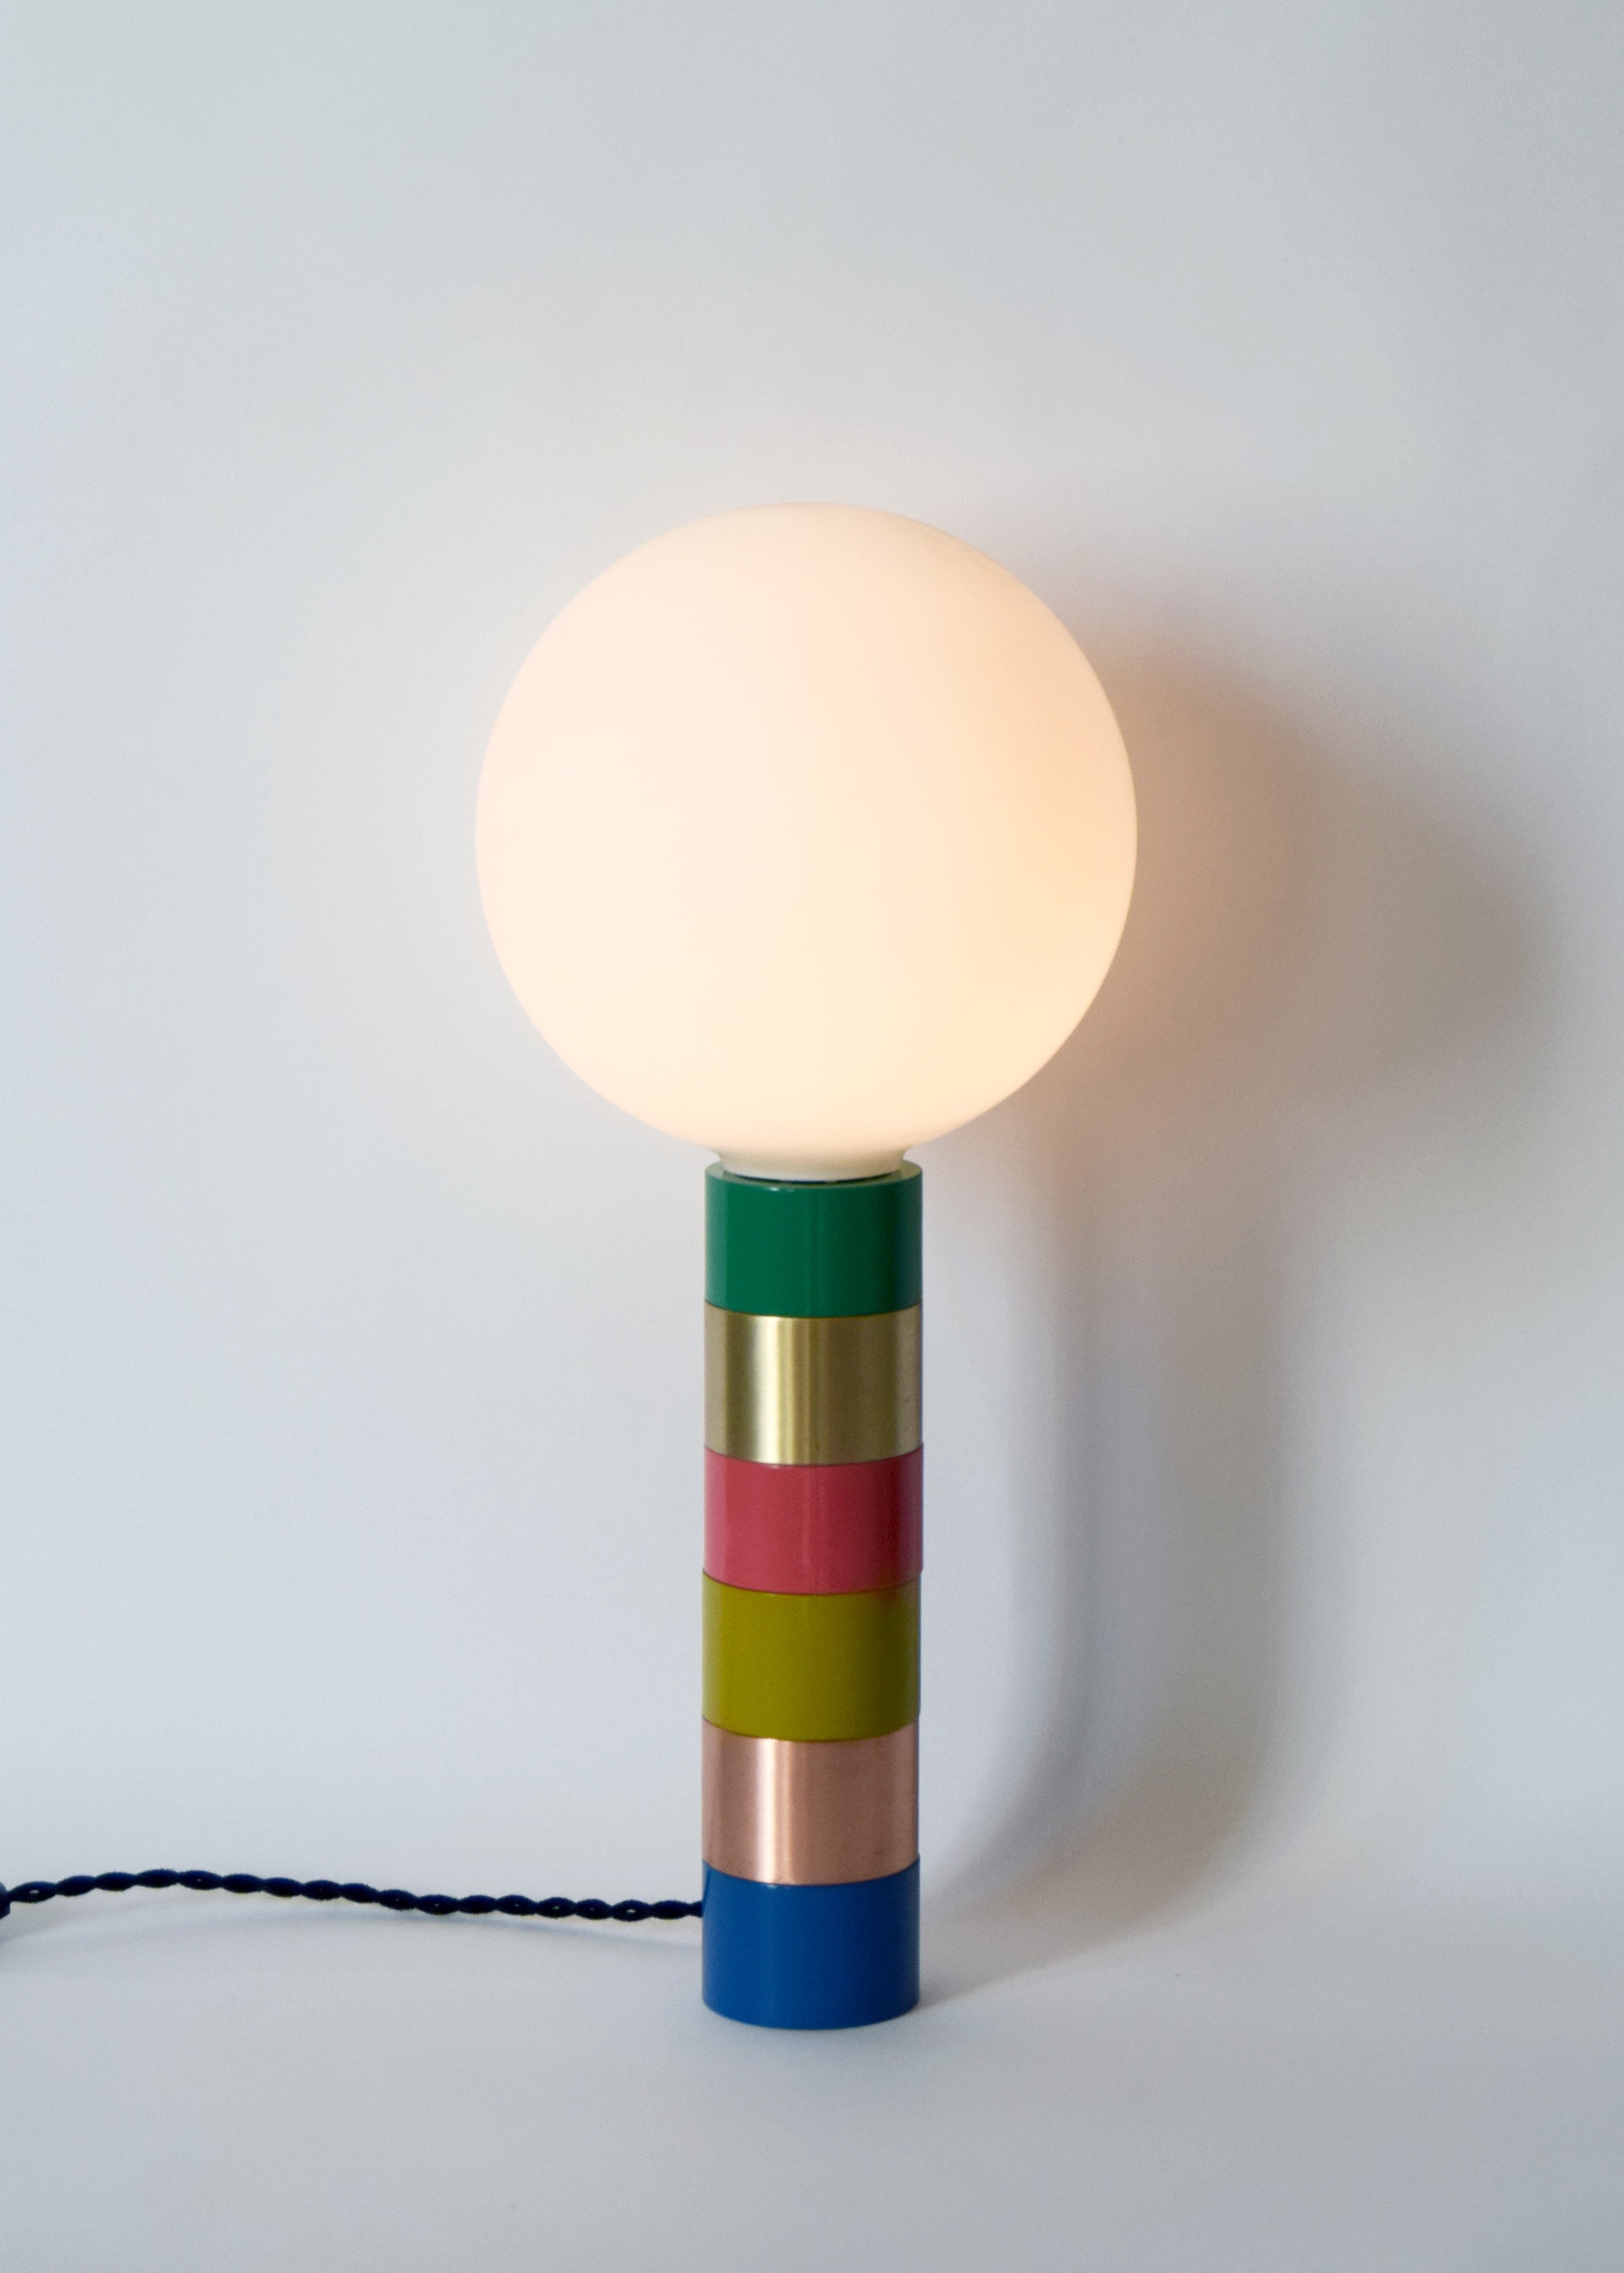 The Donna table lamp diffuses an intimate light. They dress a room, a bedside table next to a book. Comforting lightings, with character.

Table lamp - 2021

Composition :
Brass, Copper, Powder-coated aluminum, Hand-blown glass shade

Dimensions